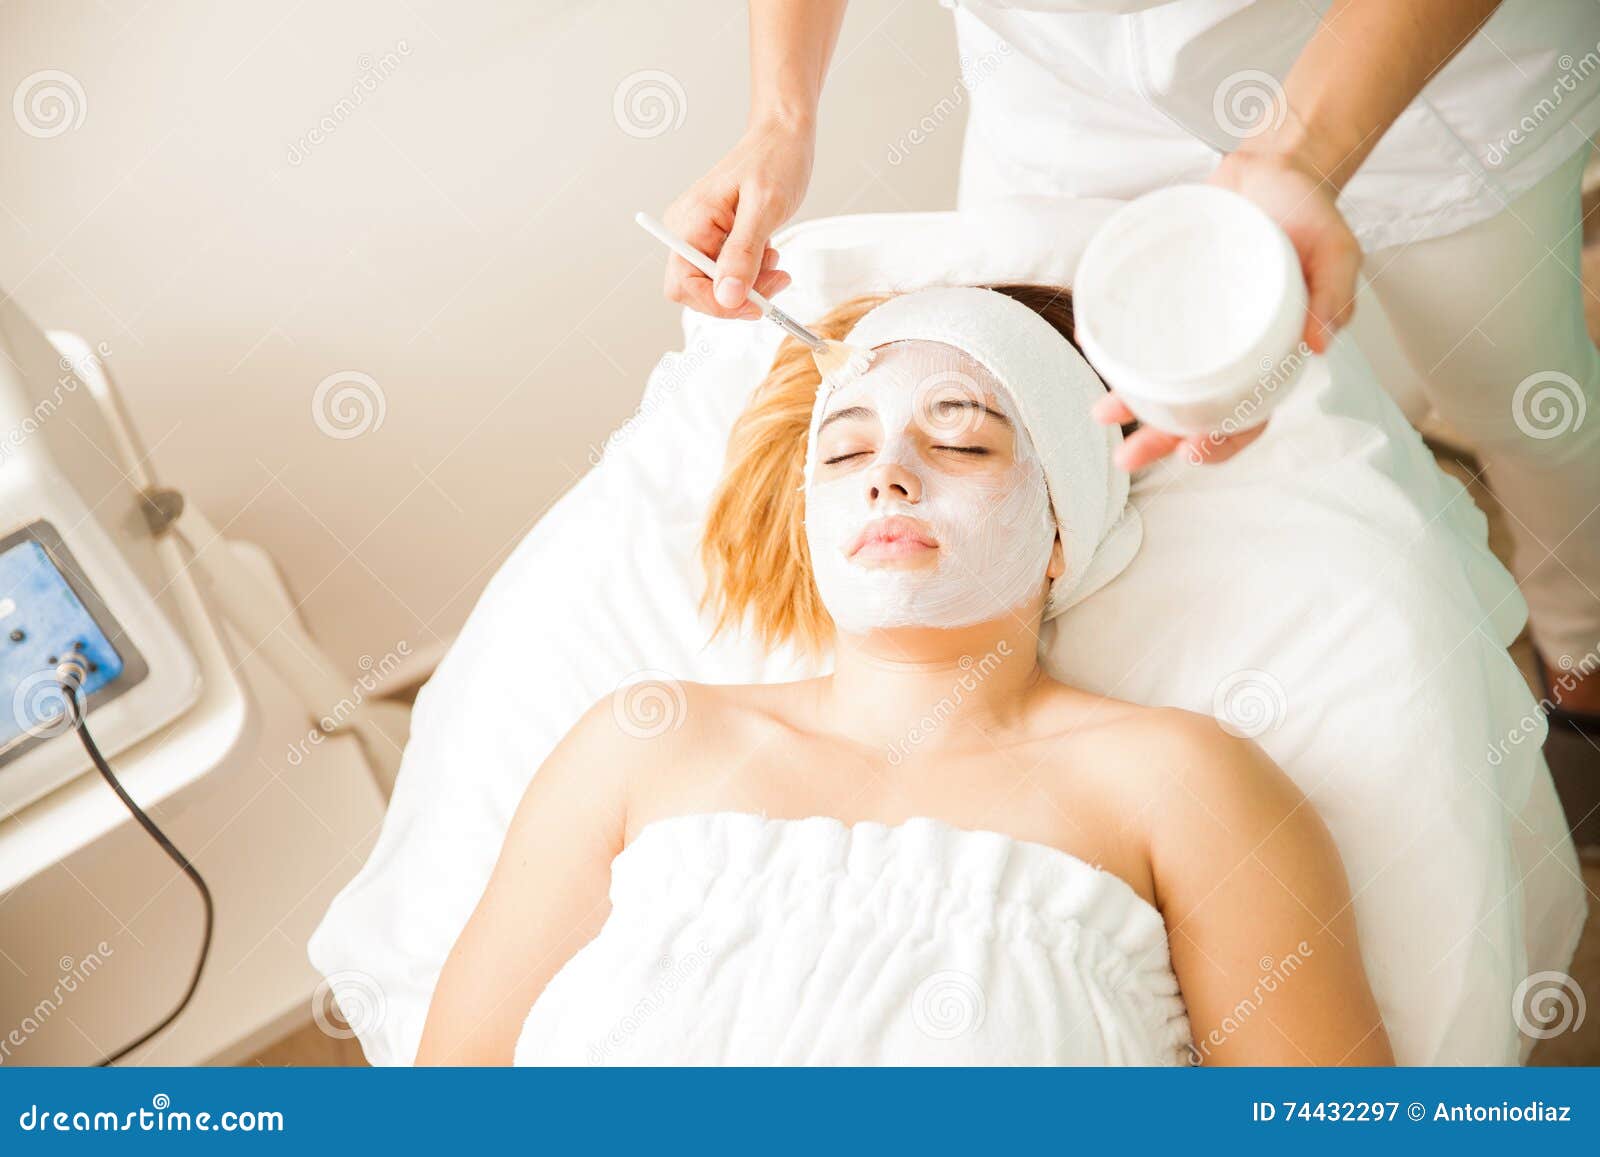 Therapist Doing Facial Treatment To Woman Stock Image Image Of Face Adult 74432297